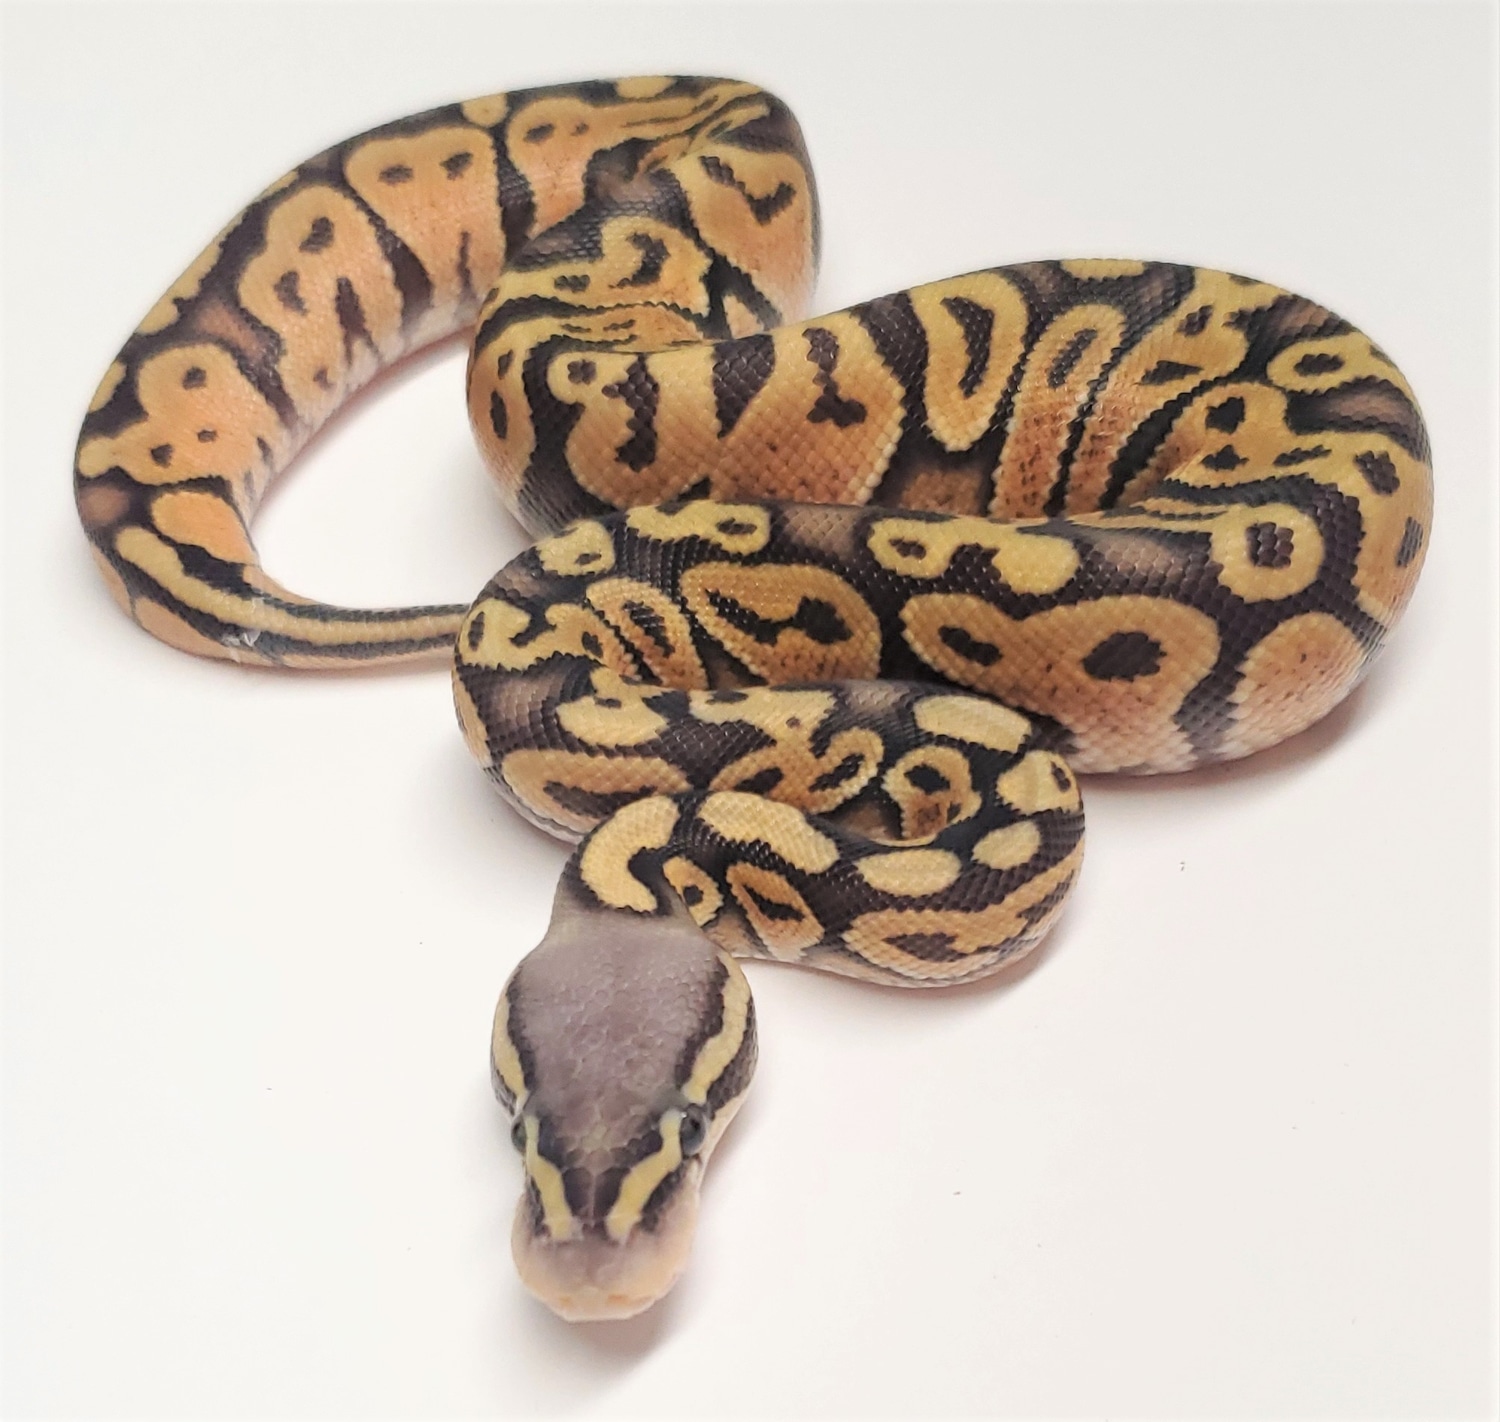 Super pastel orange ghost ball python by gold standard reptiles